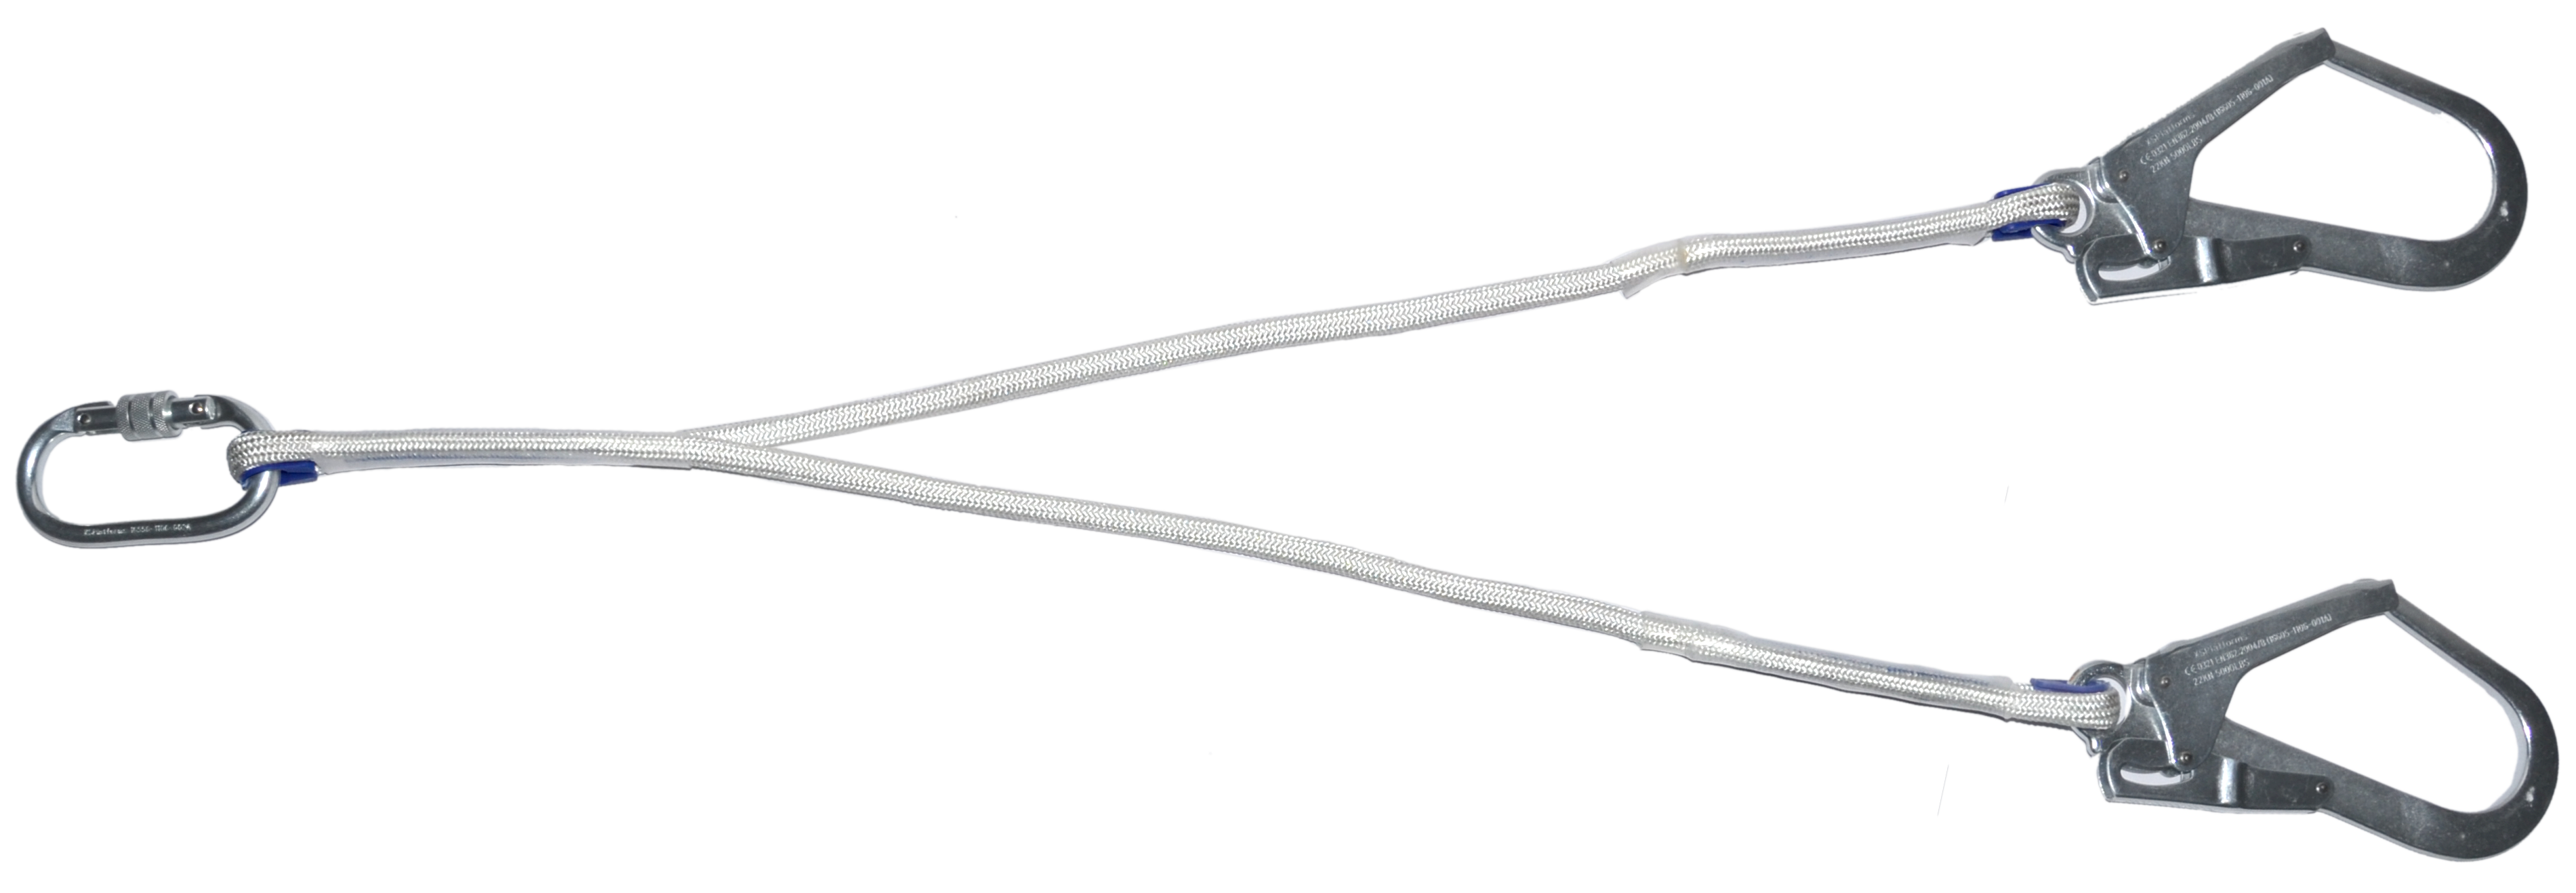 White_Forked